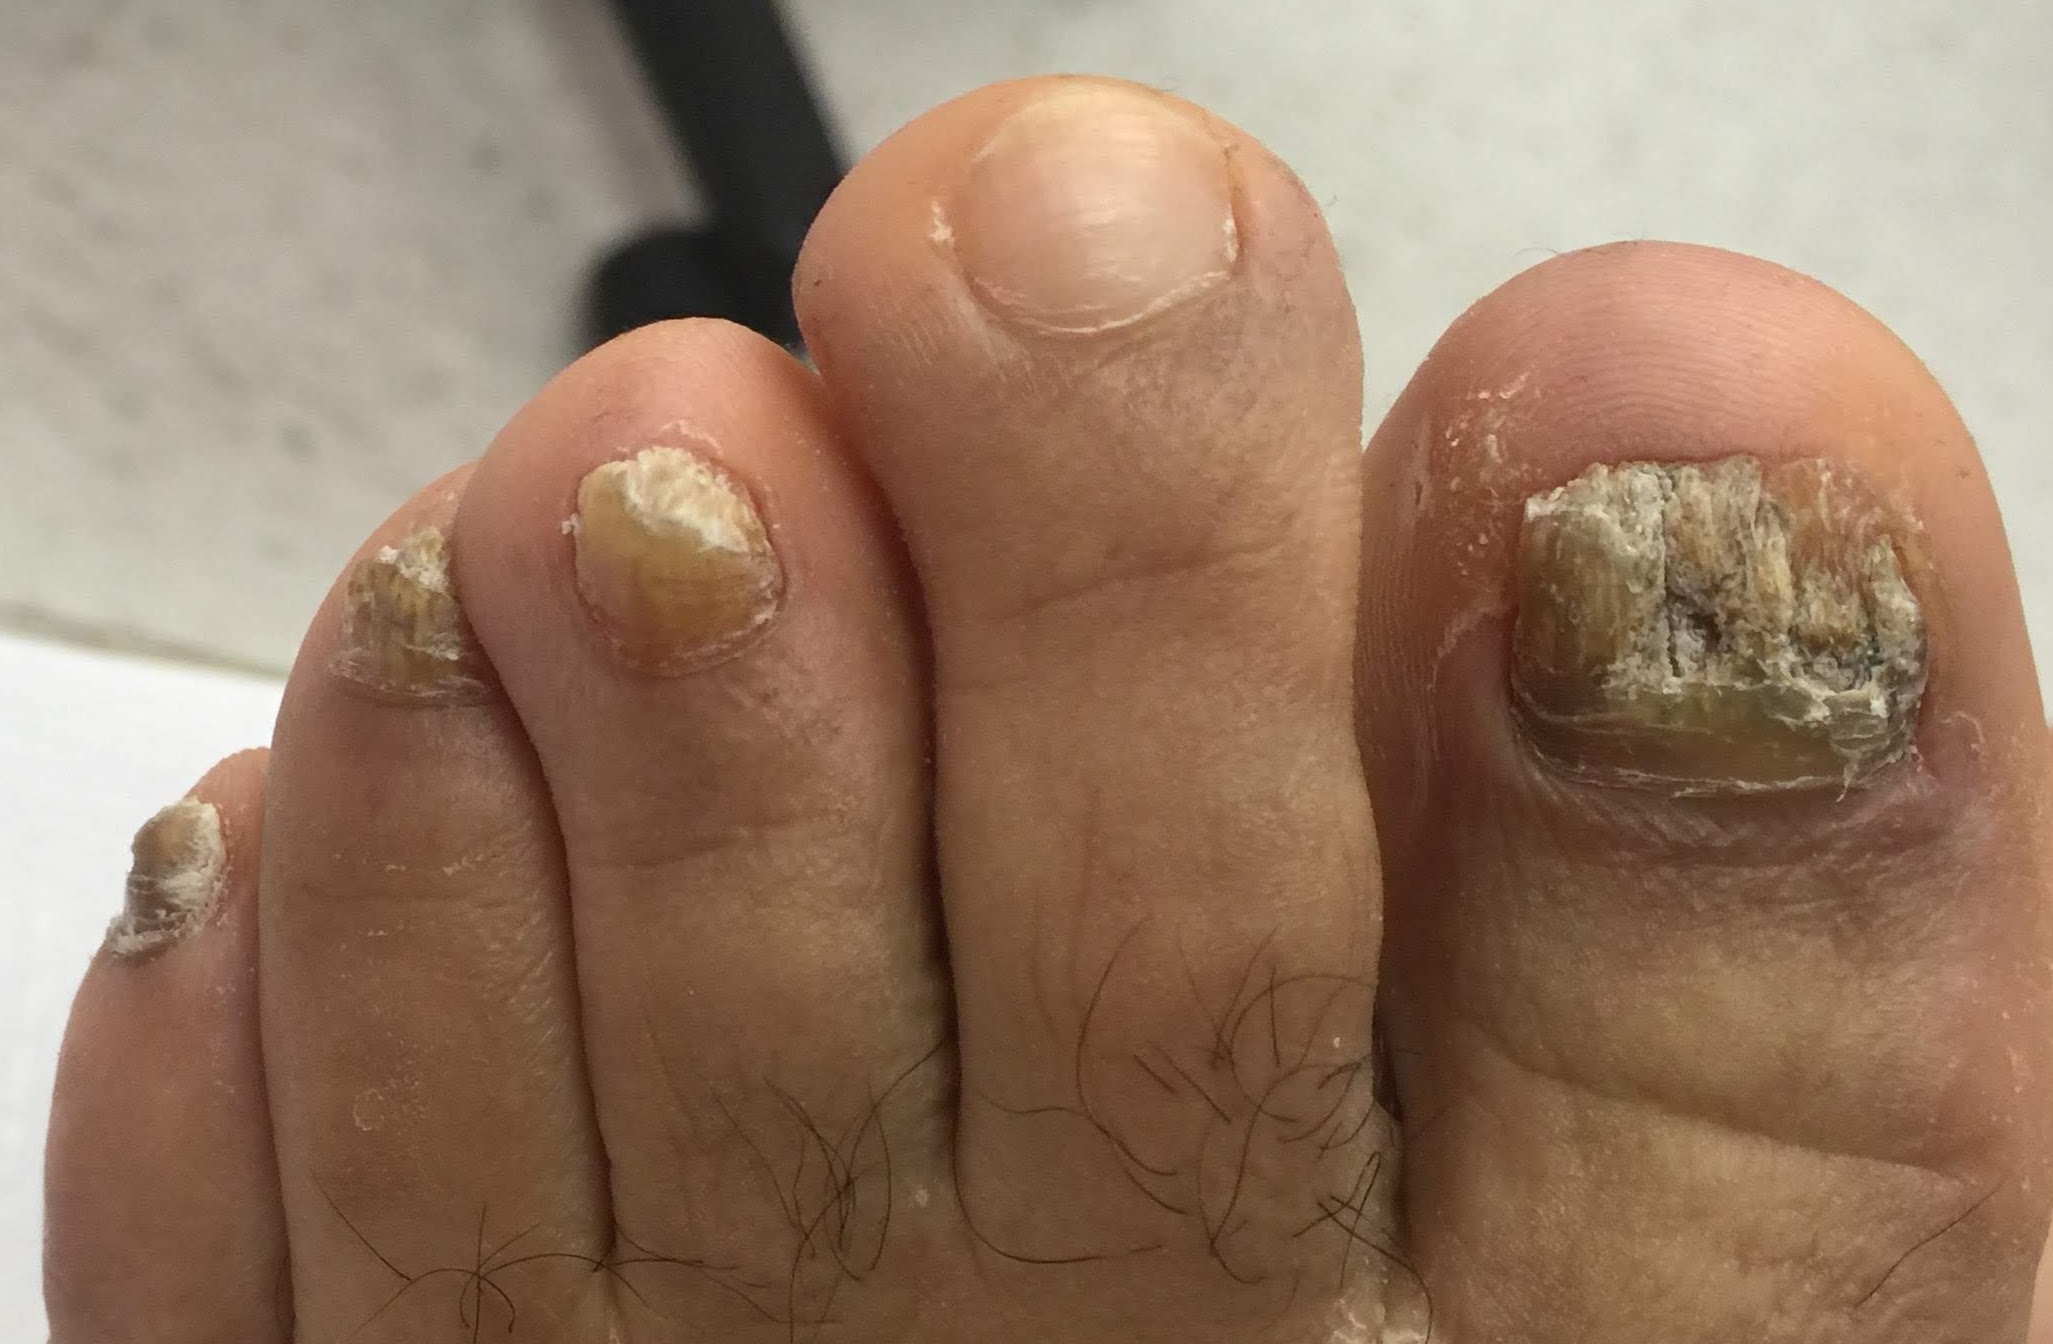 About Toenail Fungus. Before and After Images